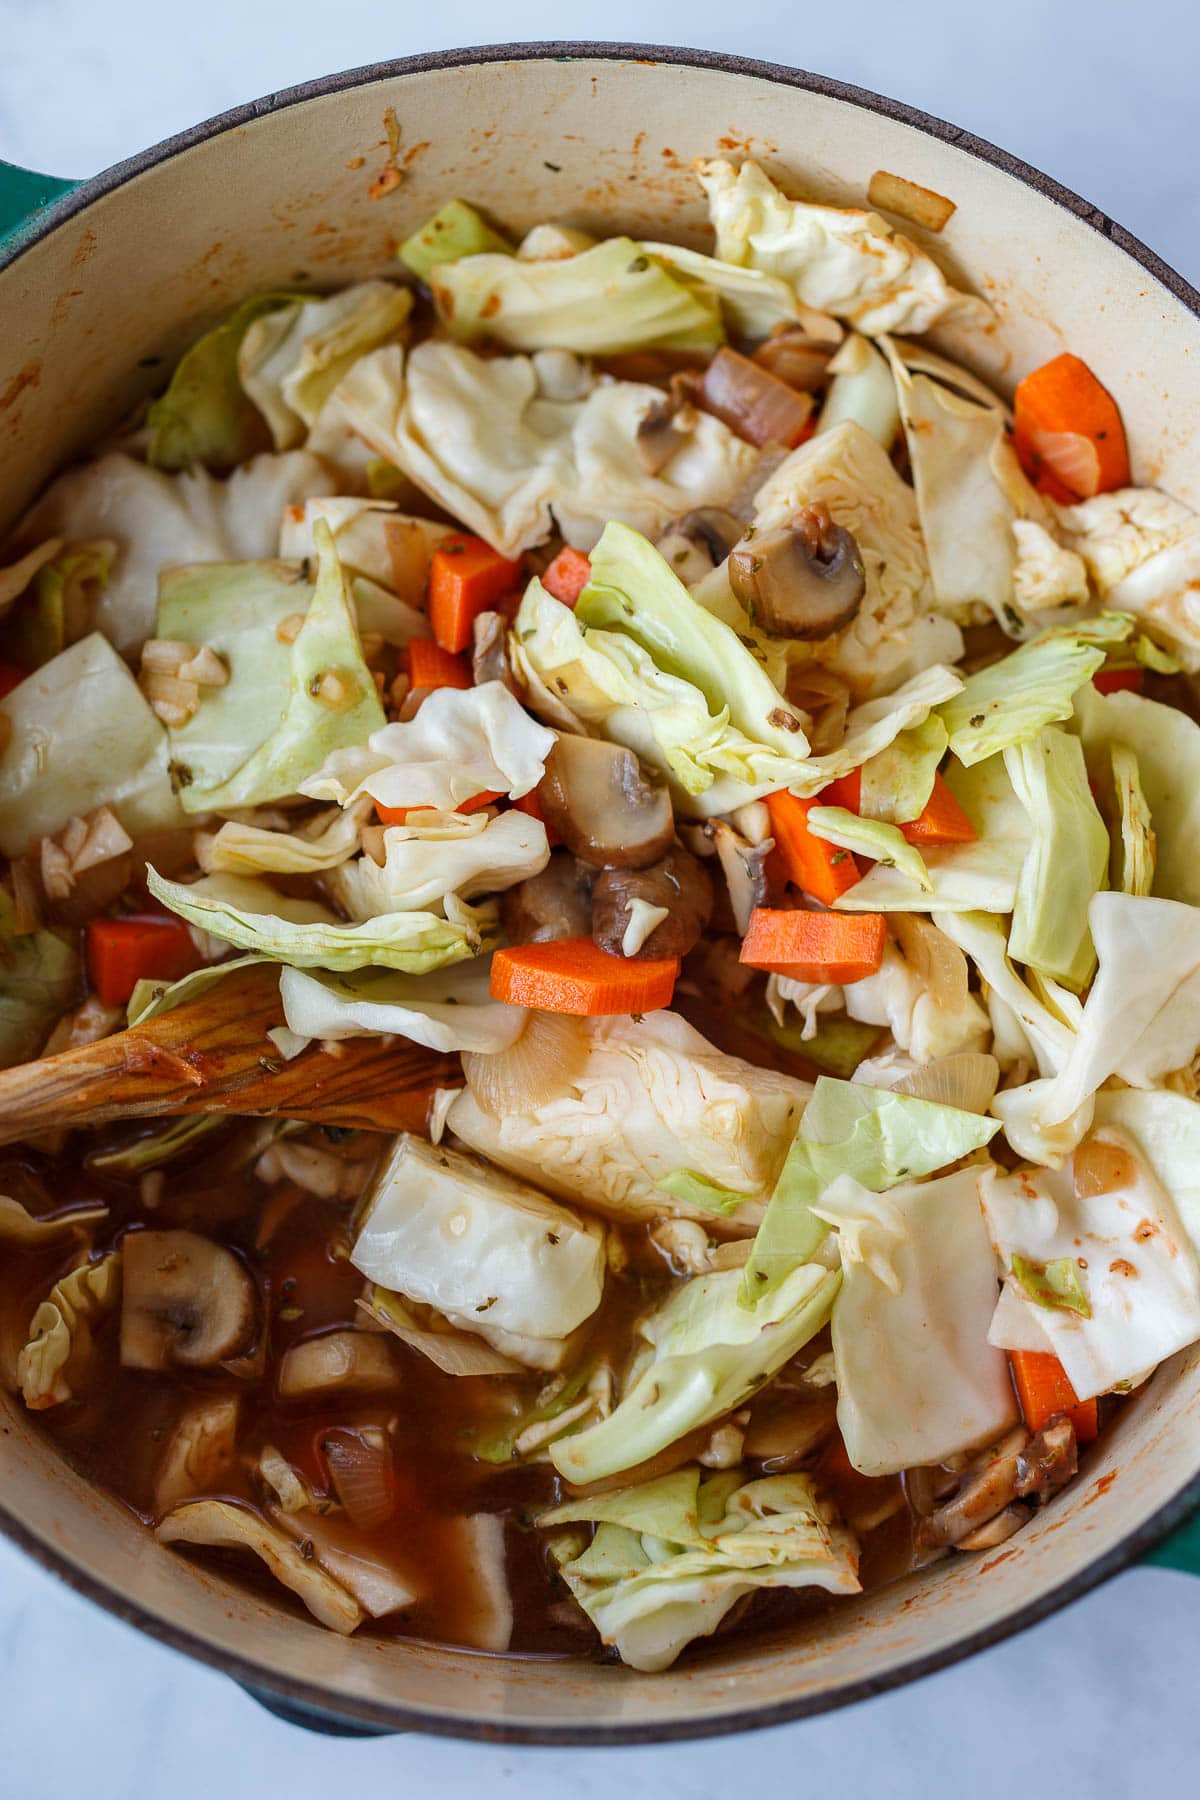 Mix all ingredients together and add broth.